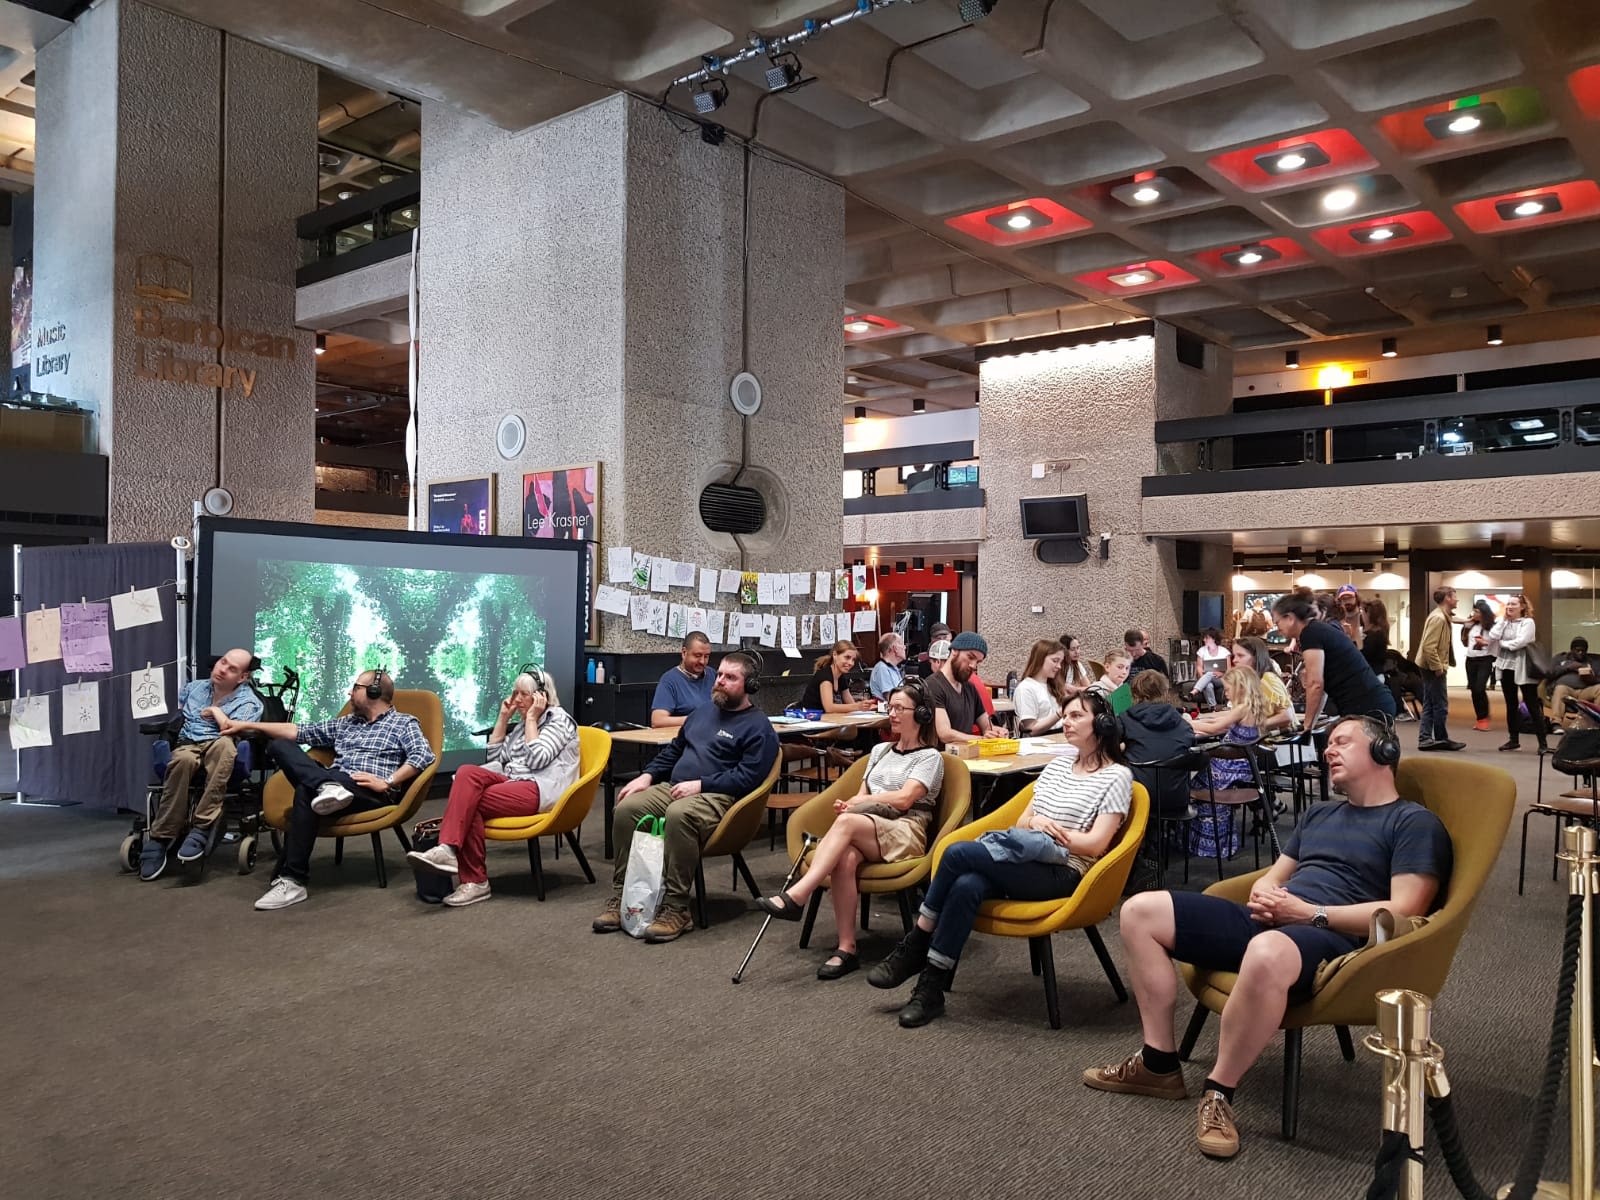 A group of people sit on yellow chairs wearing headphones, watching a large television screen